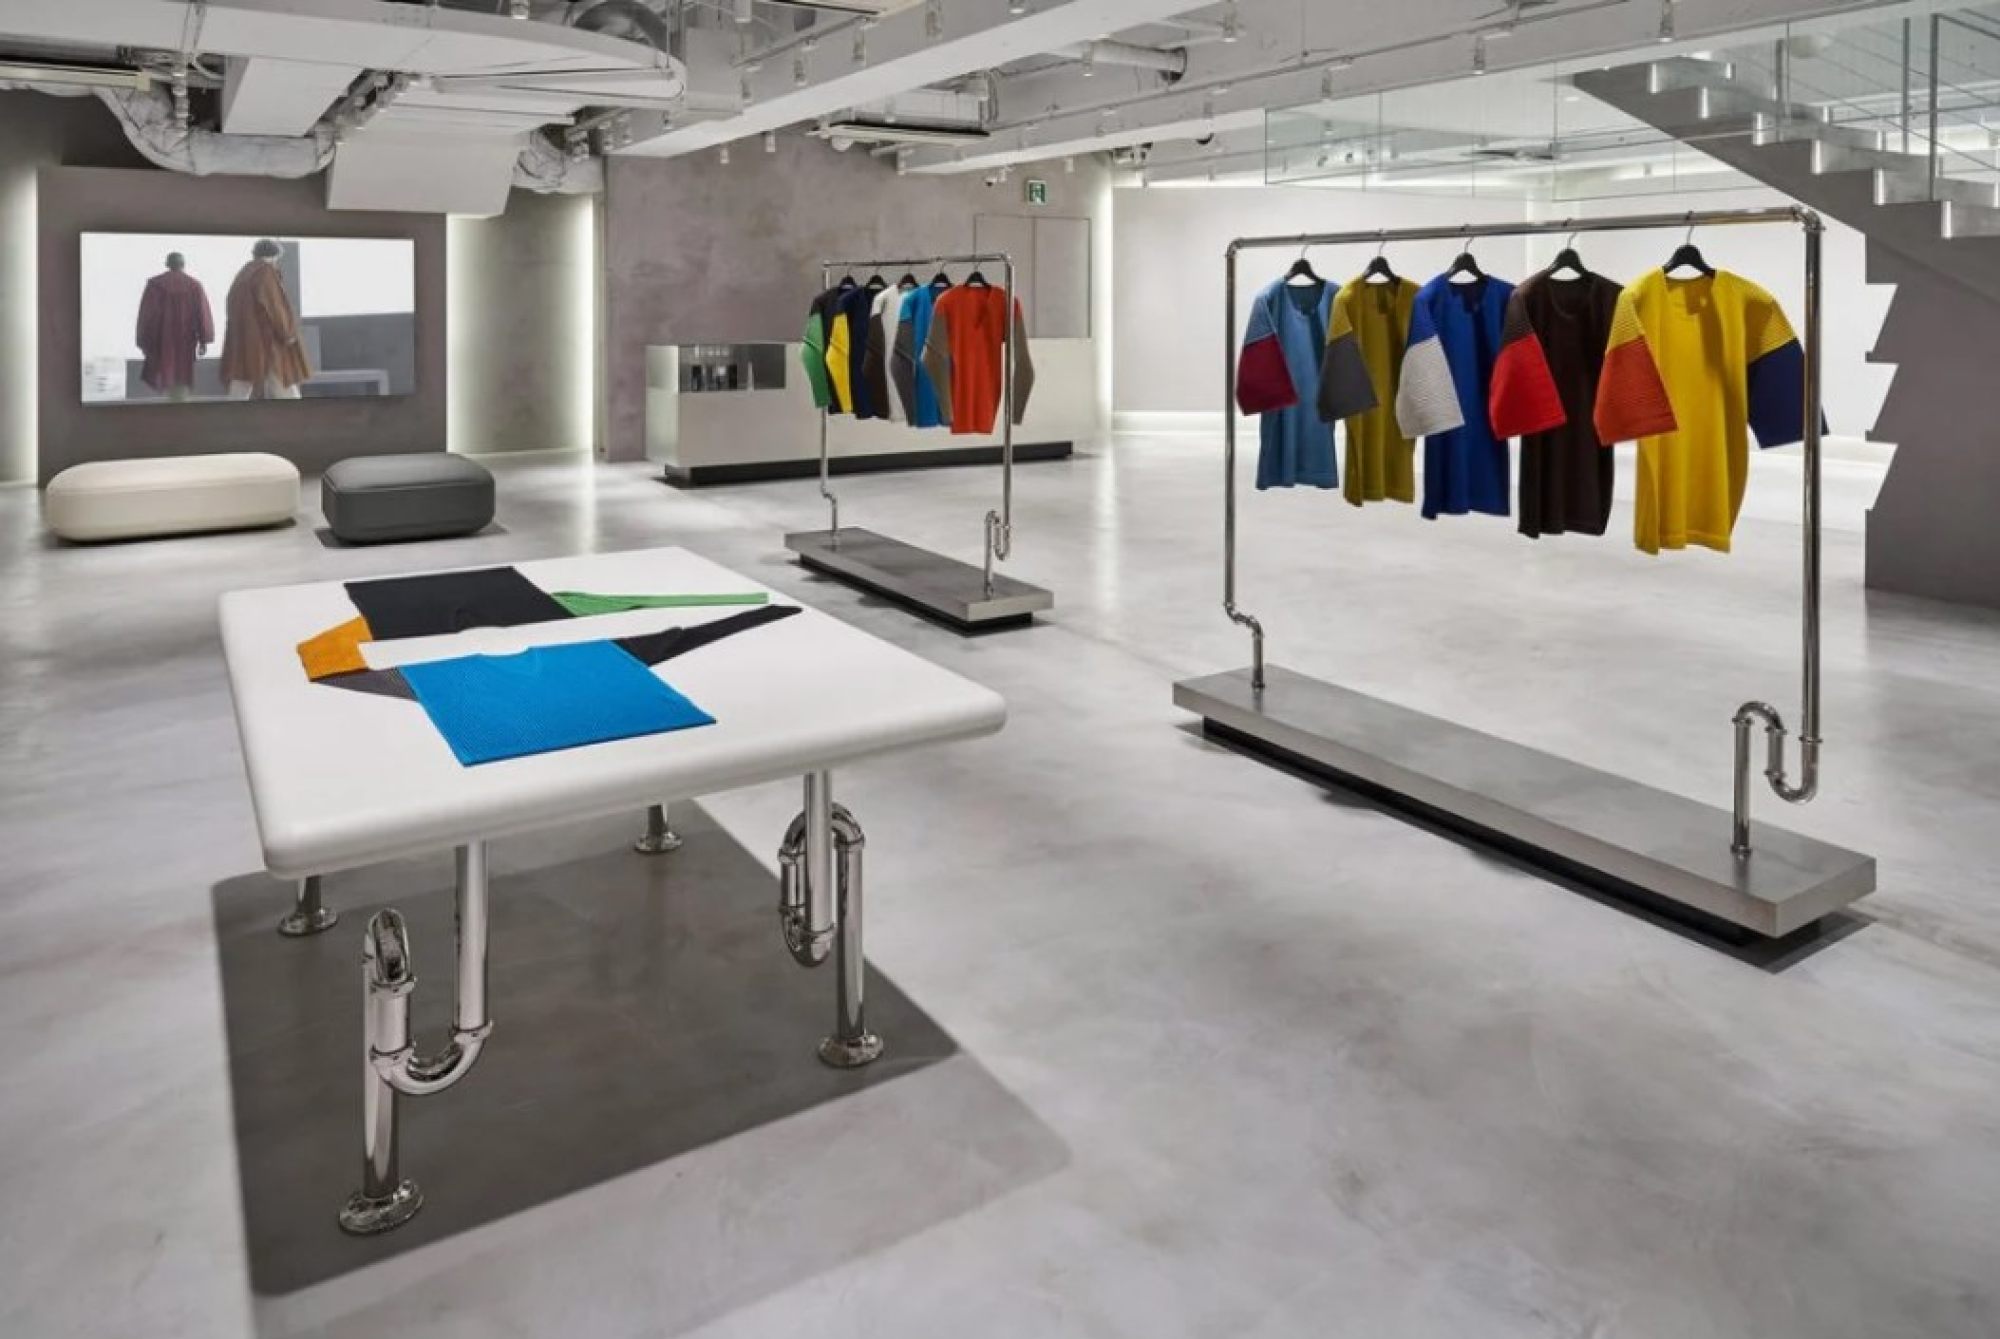 Louis Vuitton's Tokyo boutique to Dior's Seoul flagship – are